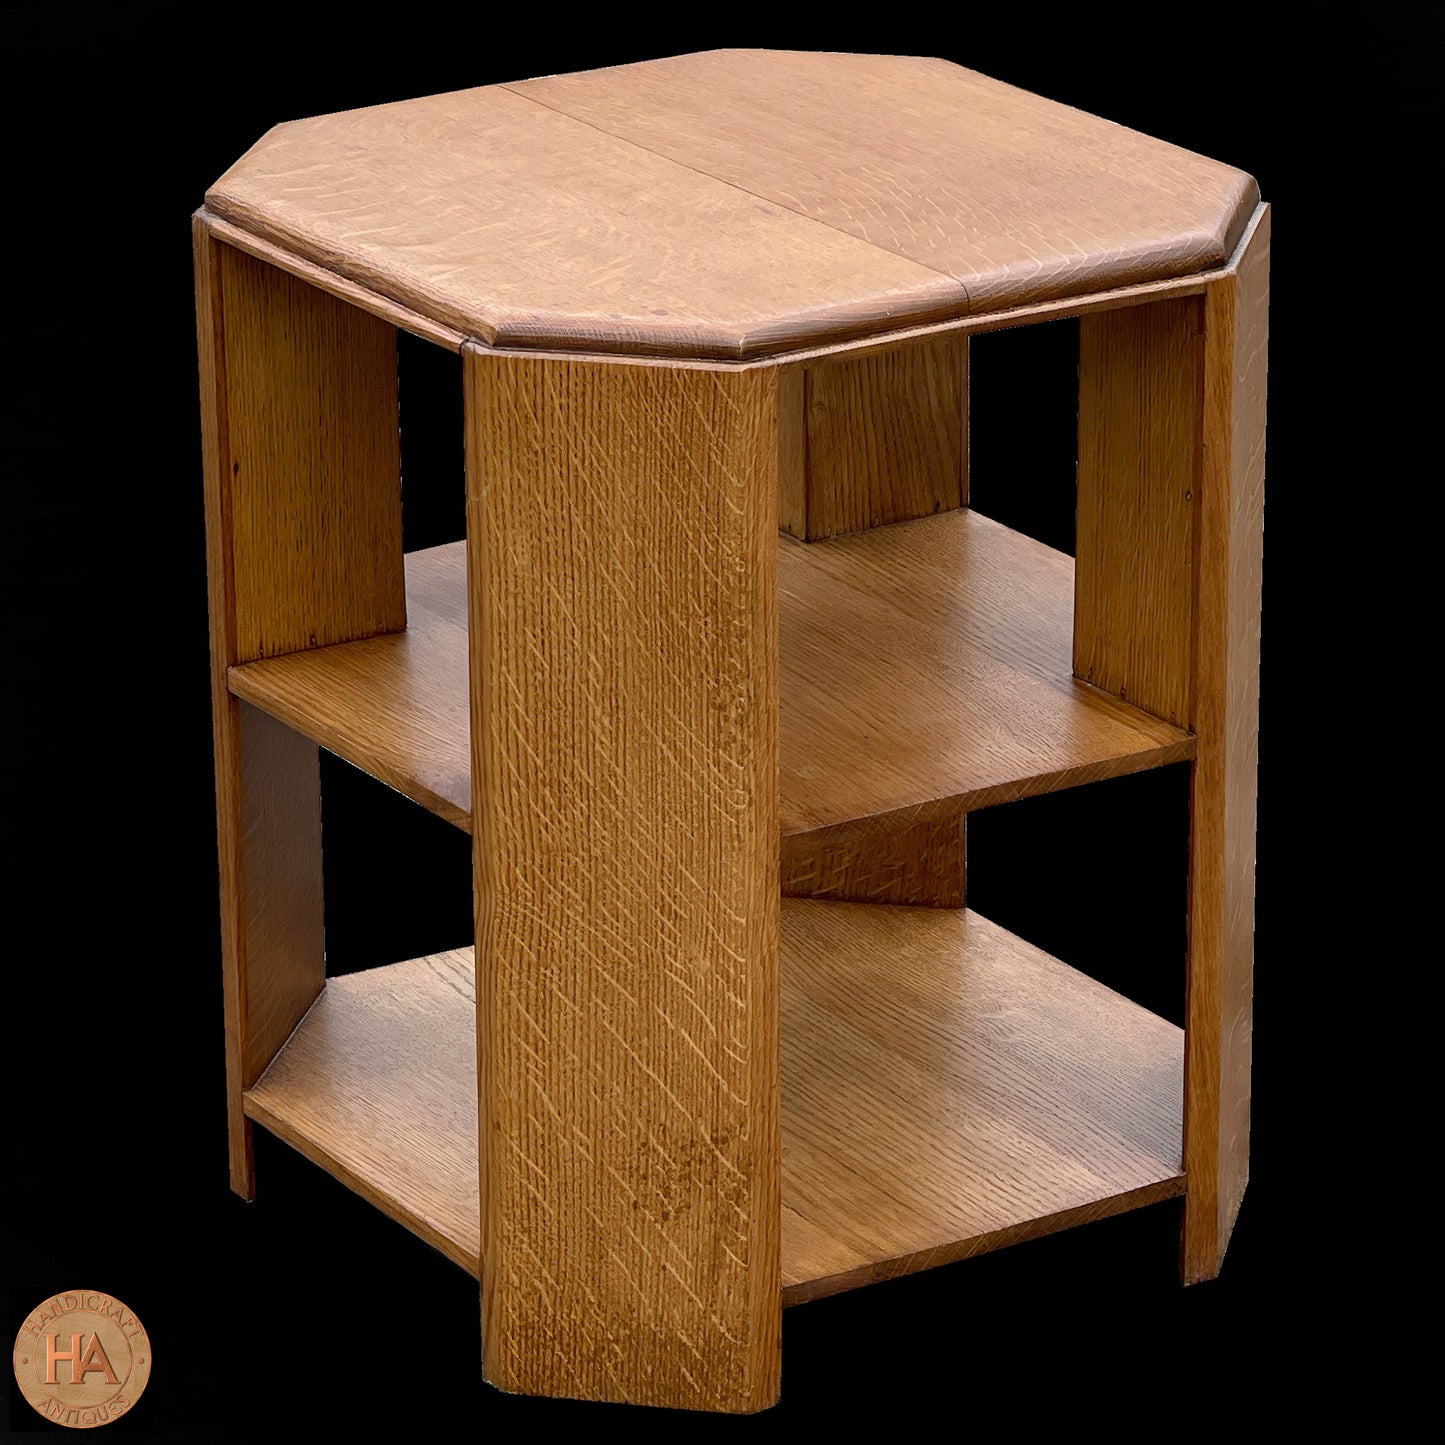 Heal and Son [Ambrose Heal] Arts & Crafts Cotswold School English Oak Table